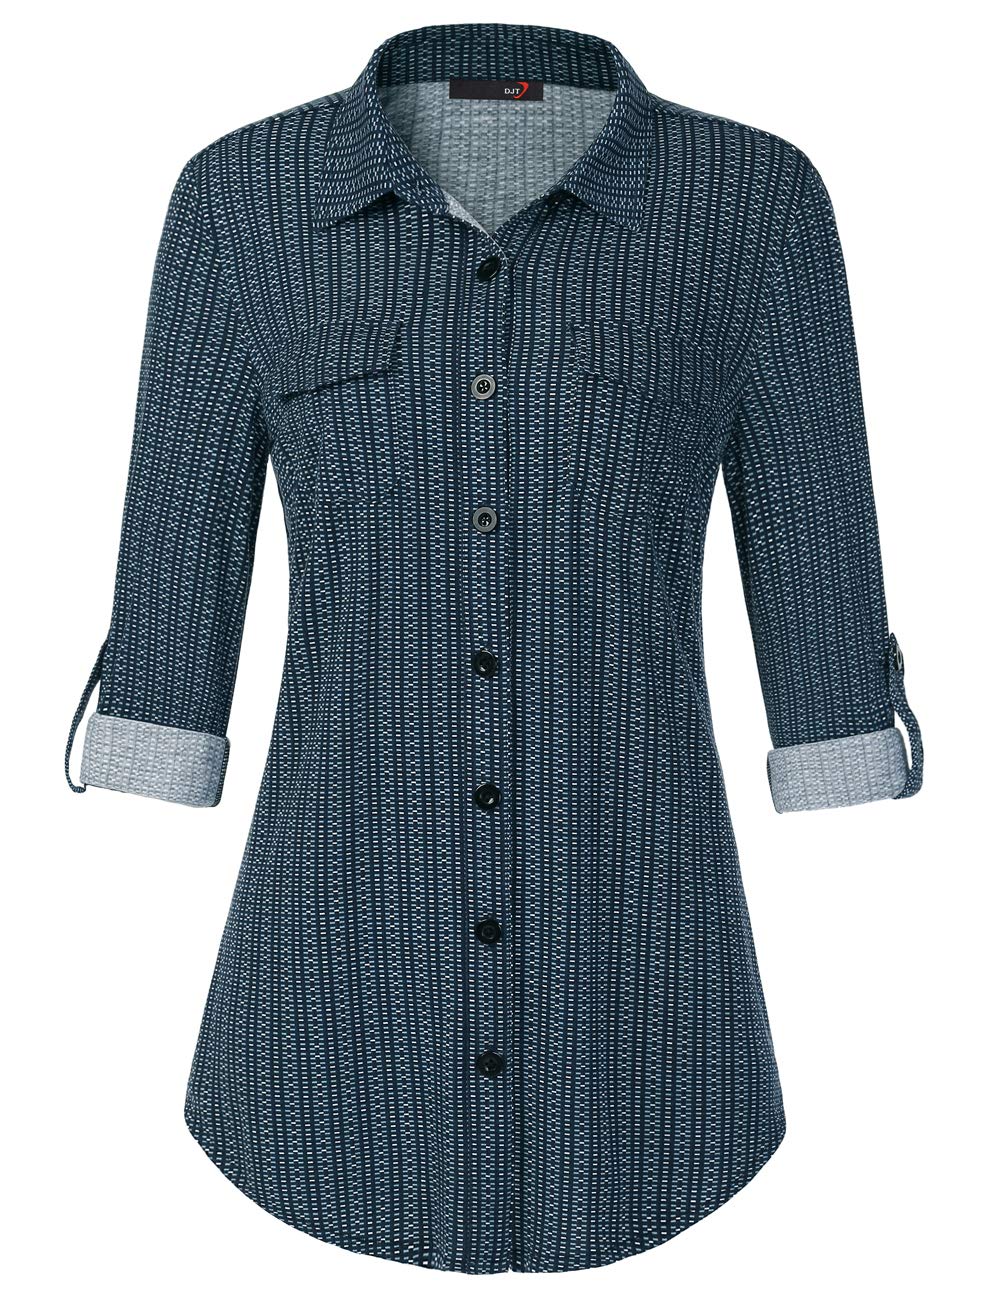 DJT Roll Up Long Sleeve Blue Striped Women’s Collared Button Down Plaid Shirt